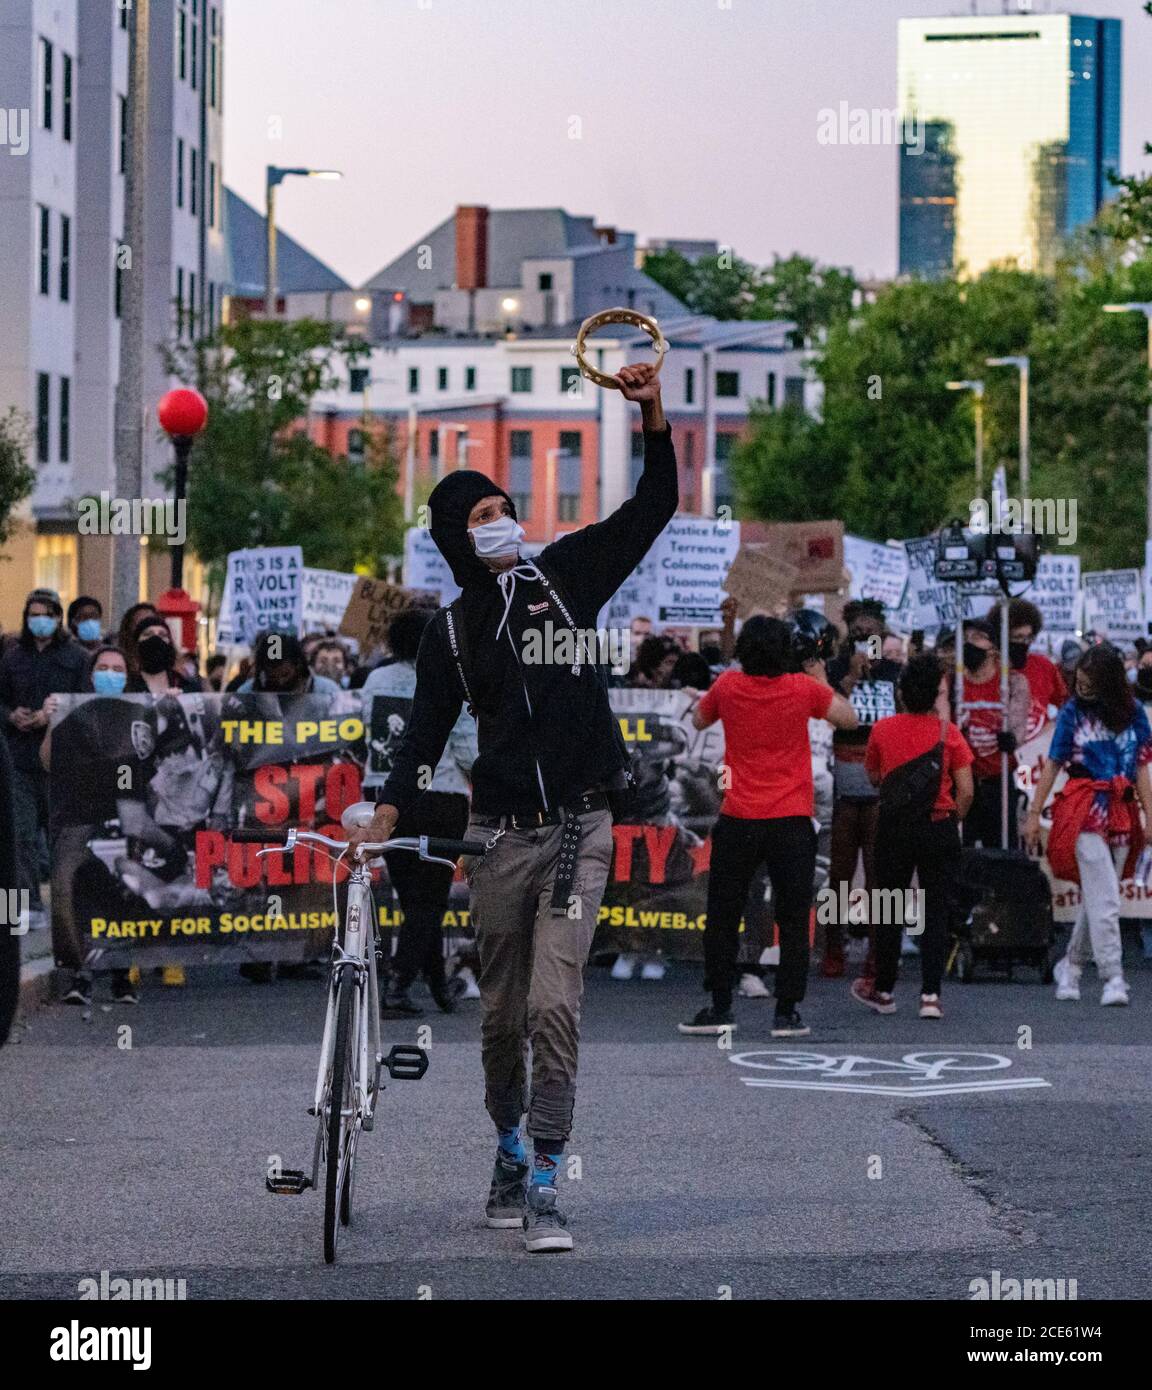 Boston, USA. August 30, 2020, Boston, Massachusetts, USA: Demonstrators march as they rally against racial inequality and to call for justice a week after Black man Jacob Blake was shot several times by police in Kenosha, in Boston. Credit: Keiko Hiromi/AFLO/Alamy Live News Stock Photo